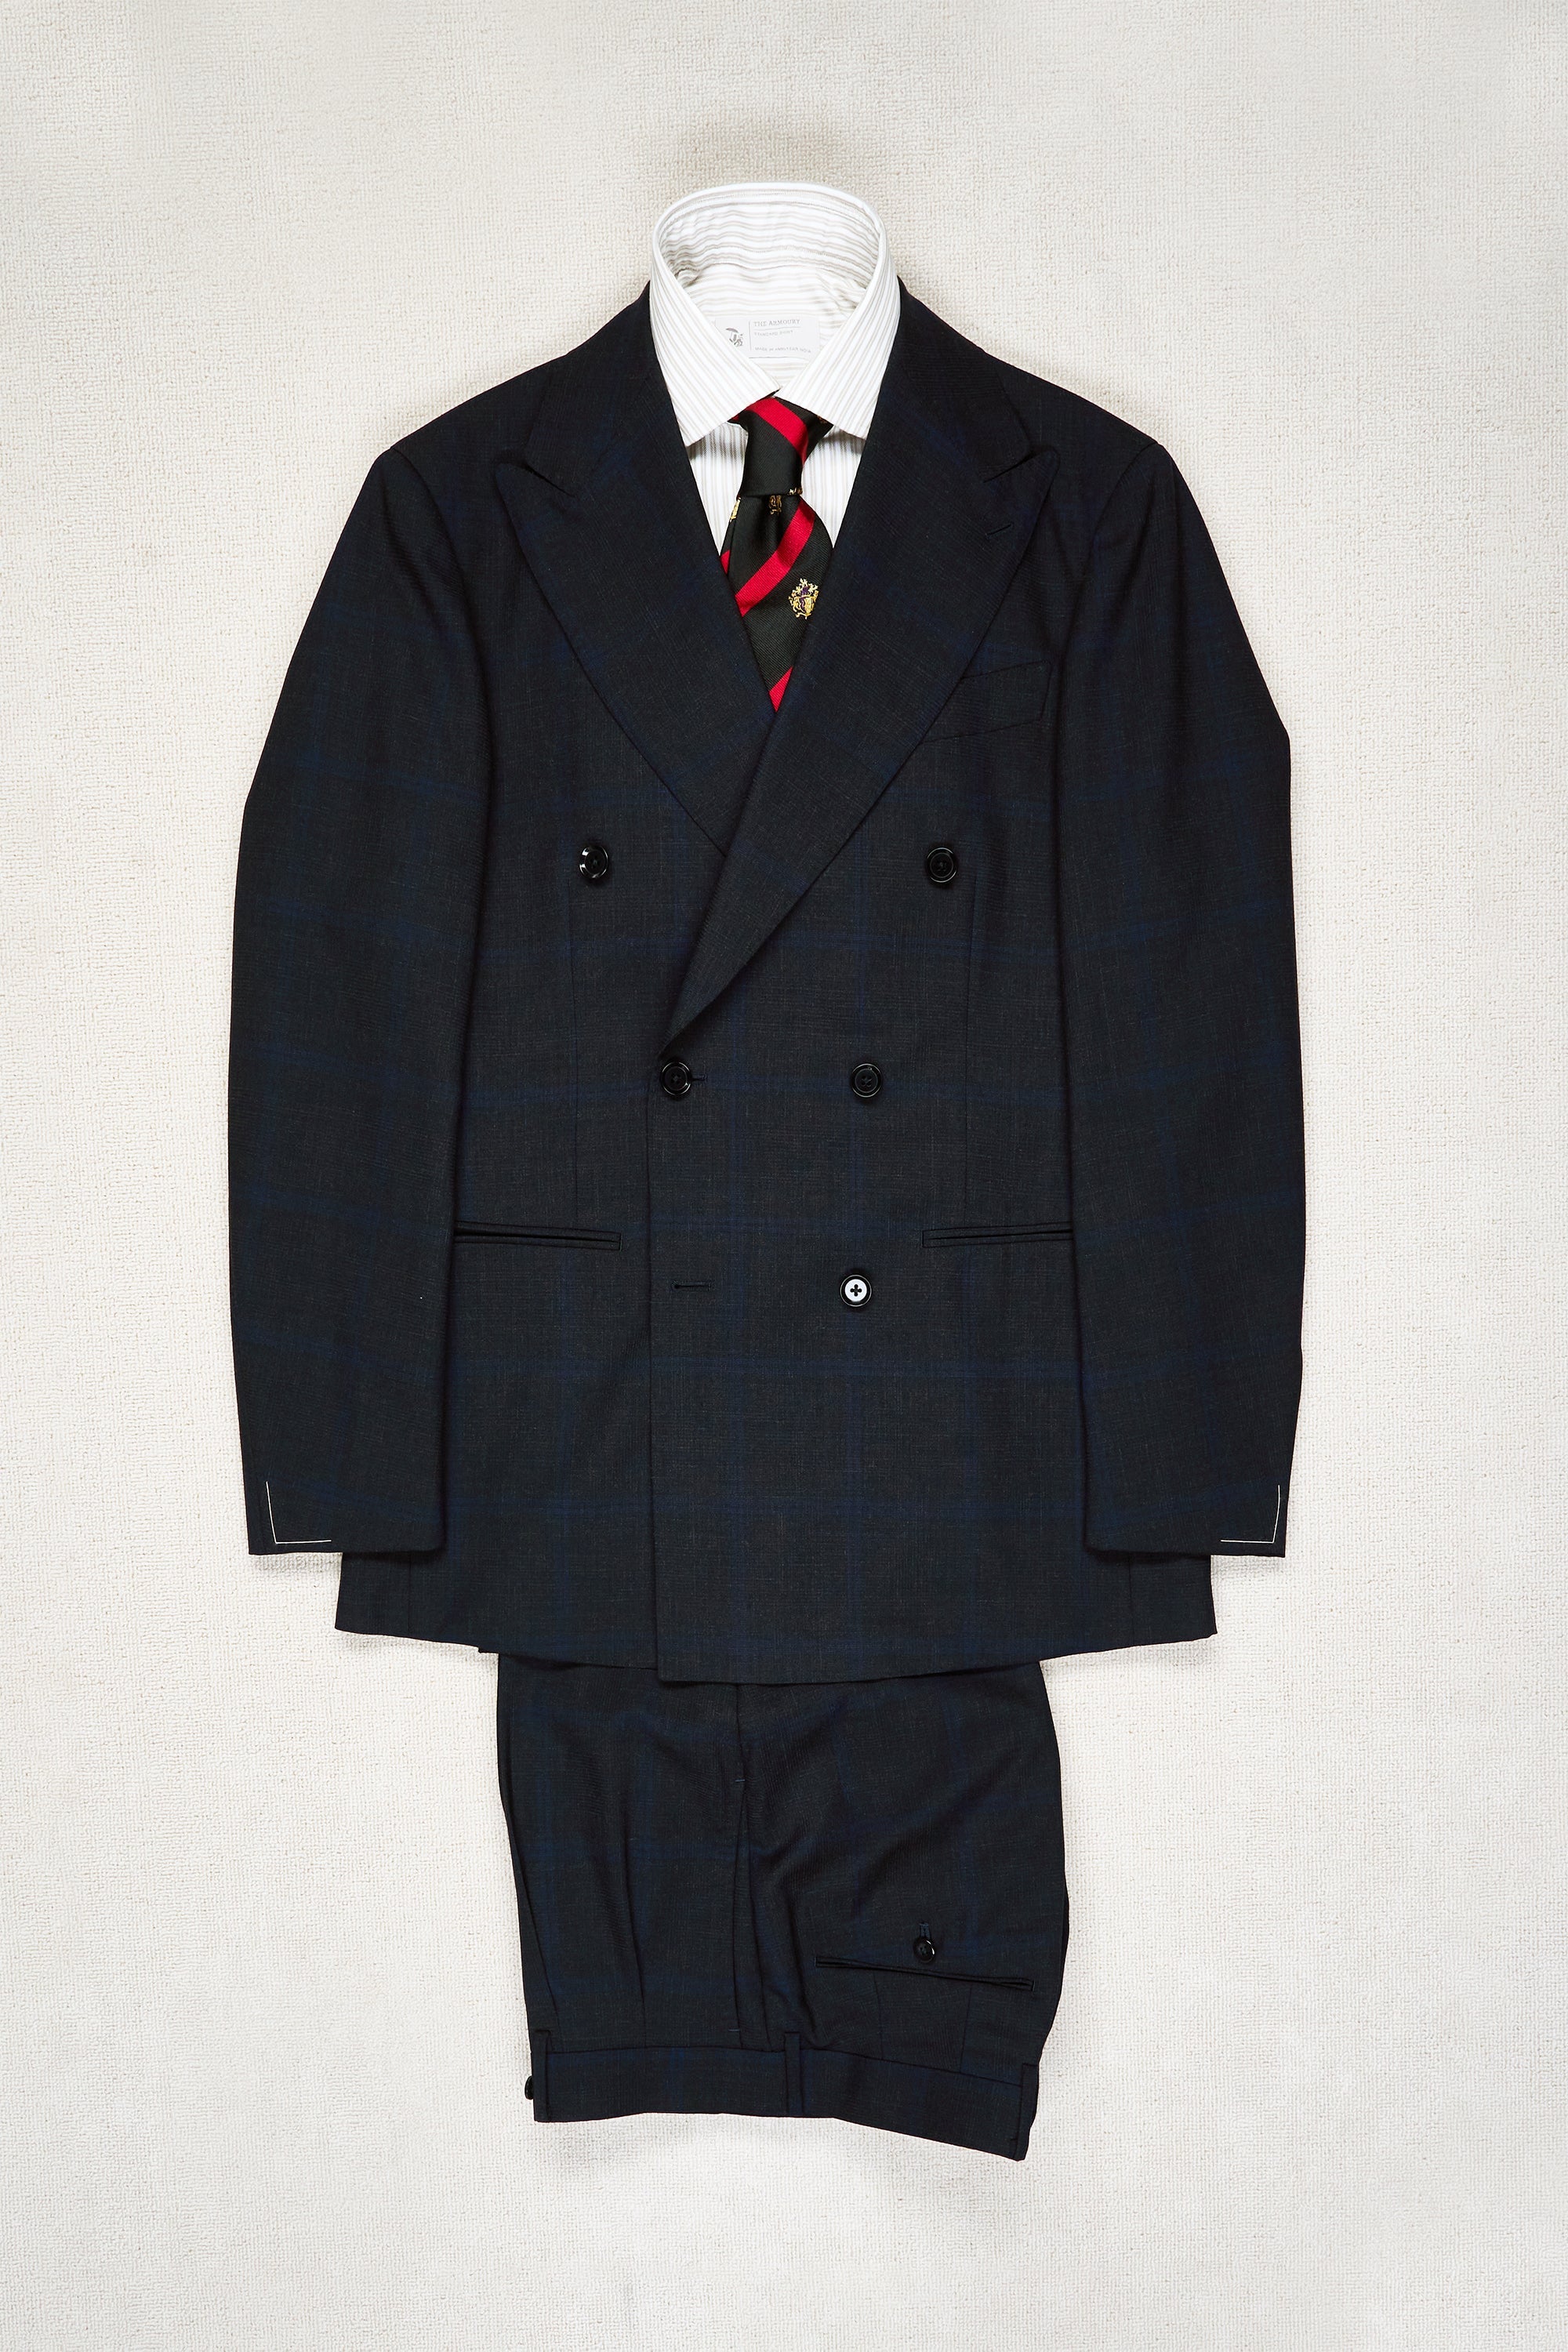 Ring Jacket 268E Charcoal with Navy Check Wool Double Breasted Suit